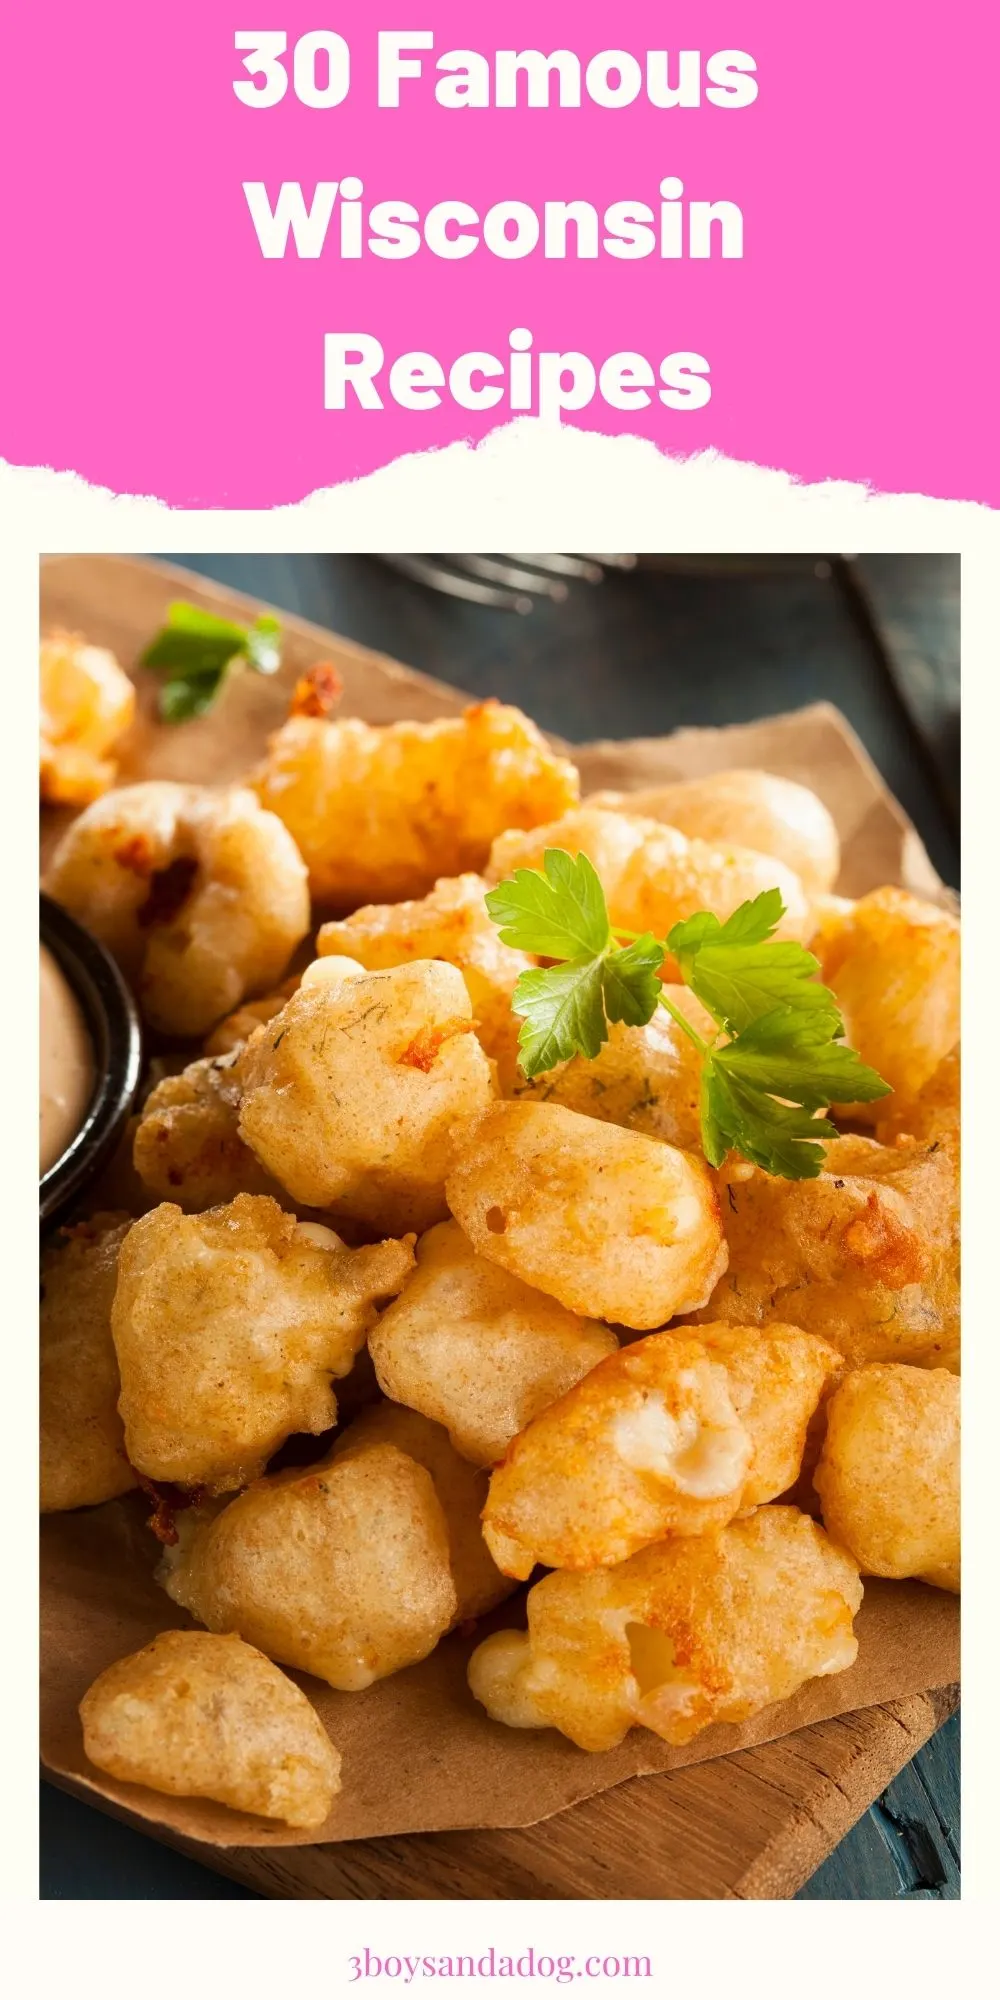 extra pin with image of fried cheese curds for famous Wisconsin recipes